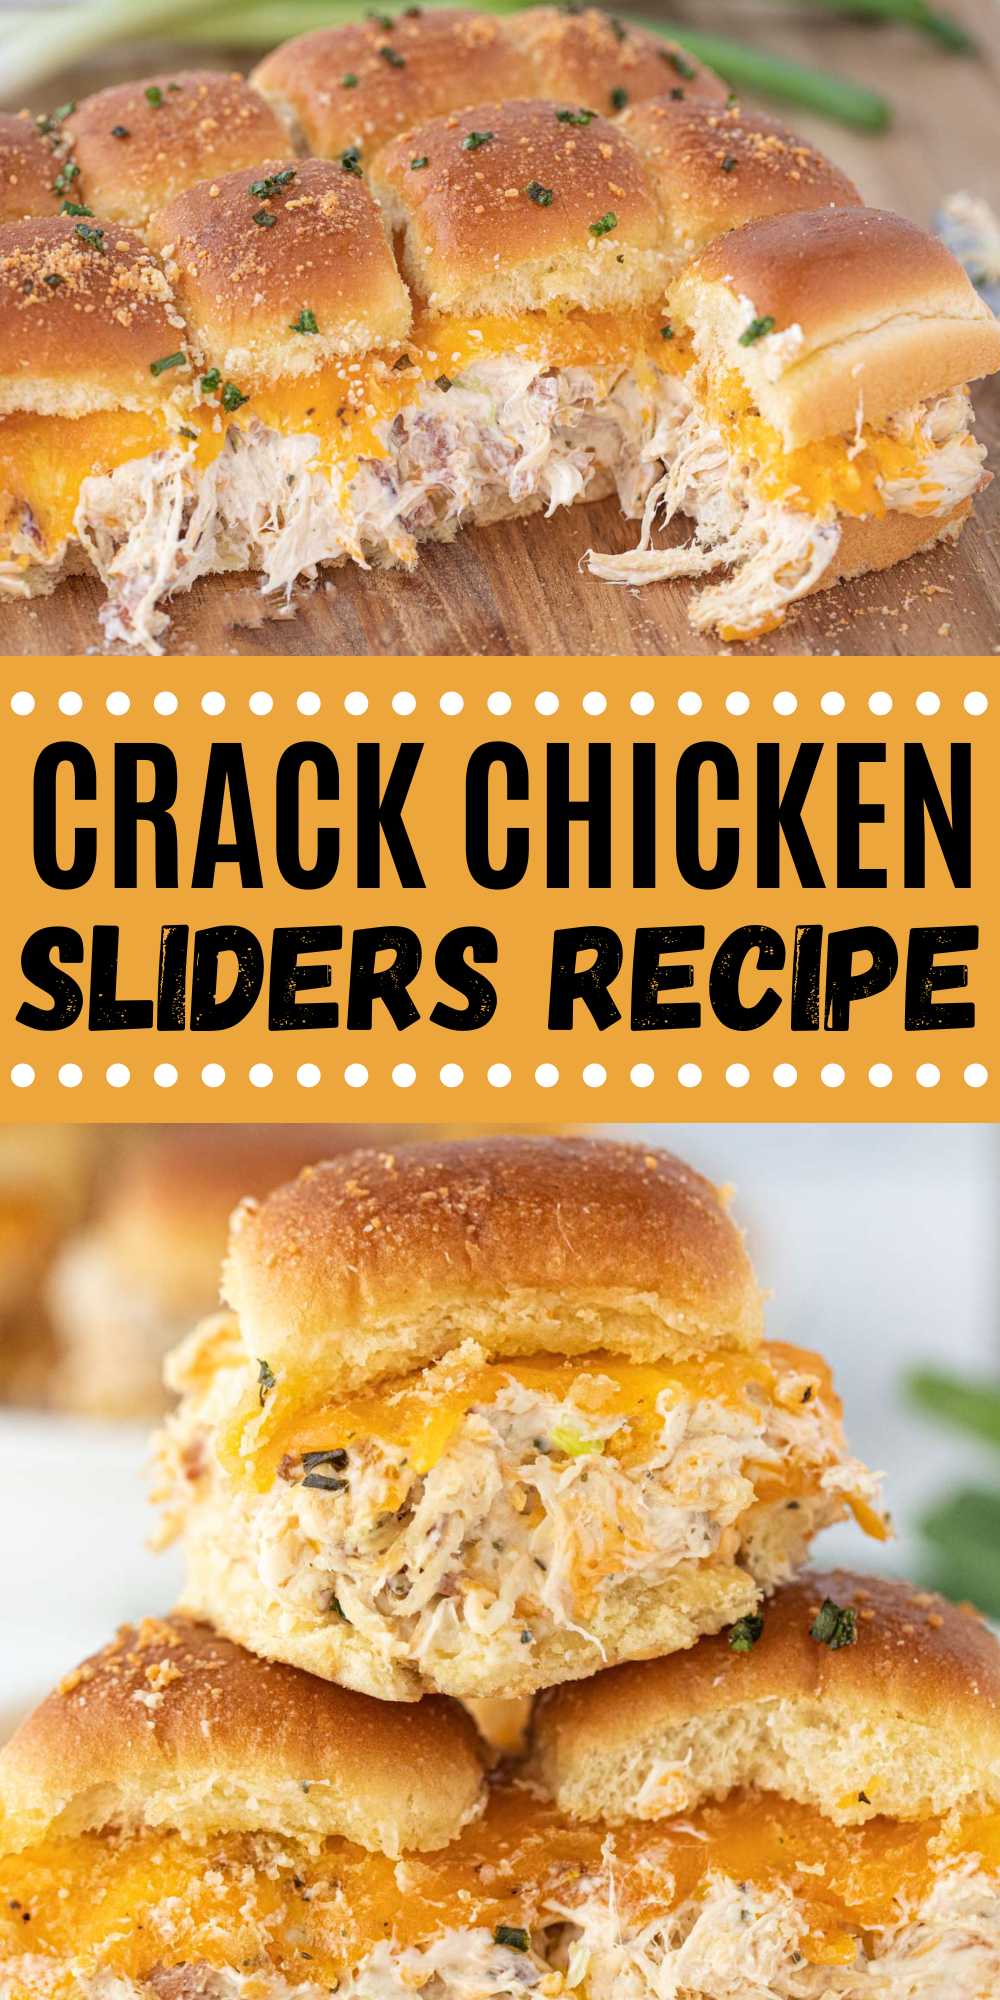 Crack Chicken Sliders is loaded with flavor and easy to make. These sliders are perfect for an lunch or served at your next gathering. If you love Crack Chicken Recipes, then you are going to love these Chicken Crack Sliders. Loaded with cheese, bacon, and shredded chicken these are sure to be a crowd favorite. #eatingonadime #crackchickensliders #crackchicken